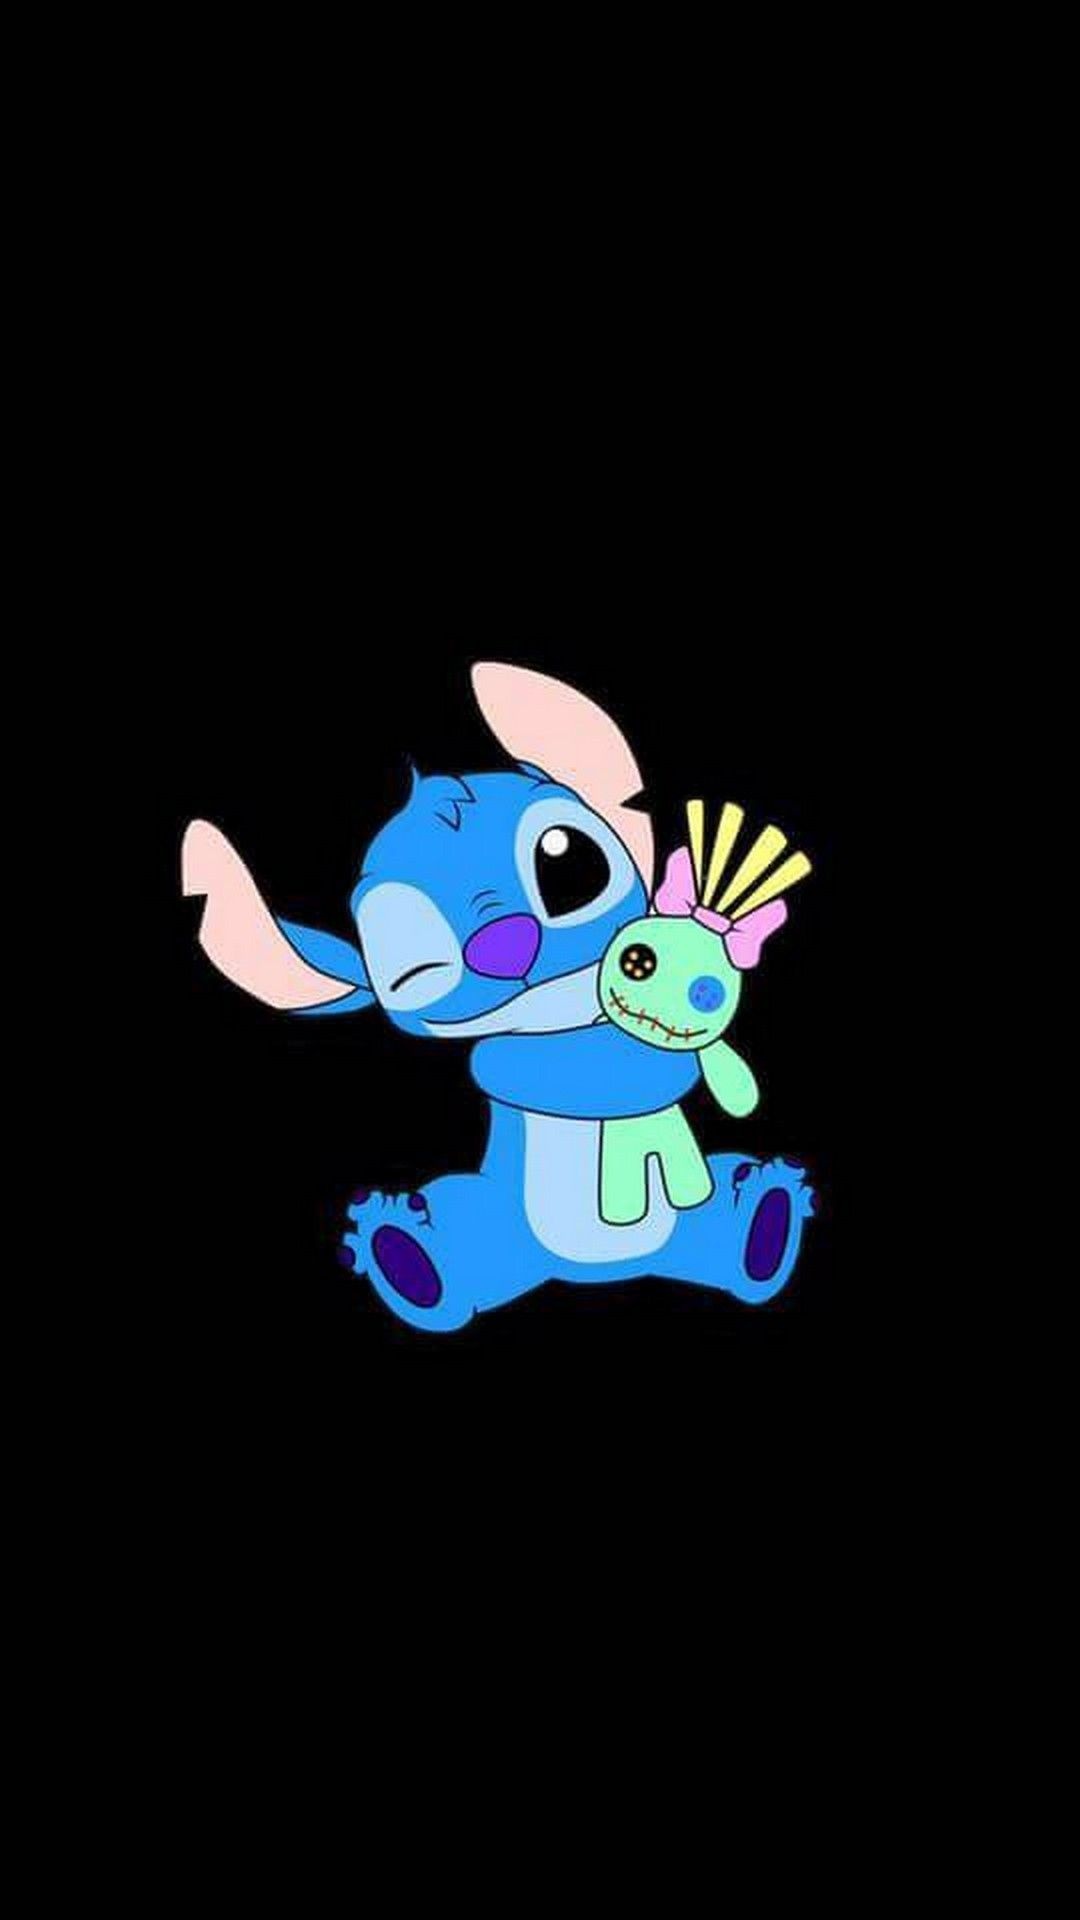 Lilo and Stitch: The Series, Stitch's HD wallpapers, Angel phone accessories, Disney iPhone wallpapers, 1080x1920 Full HD Phone